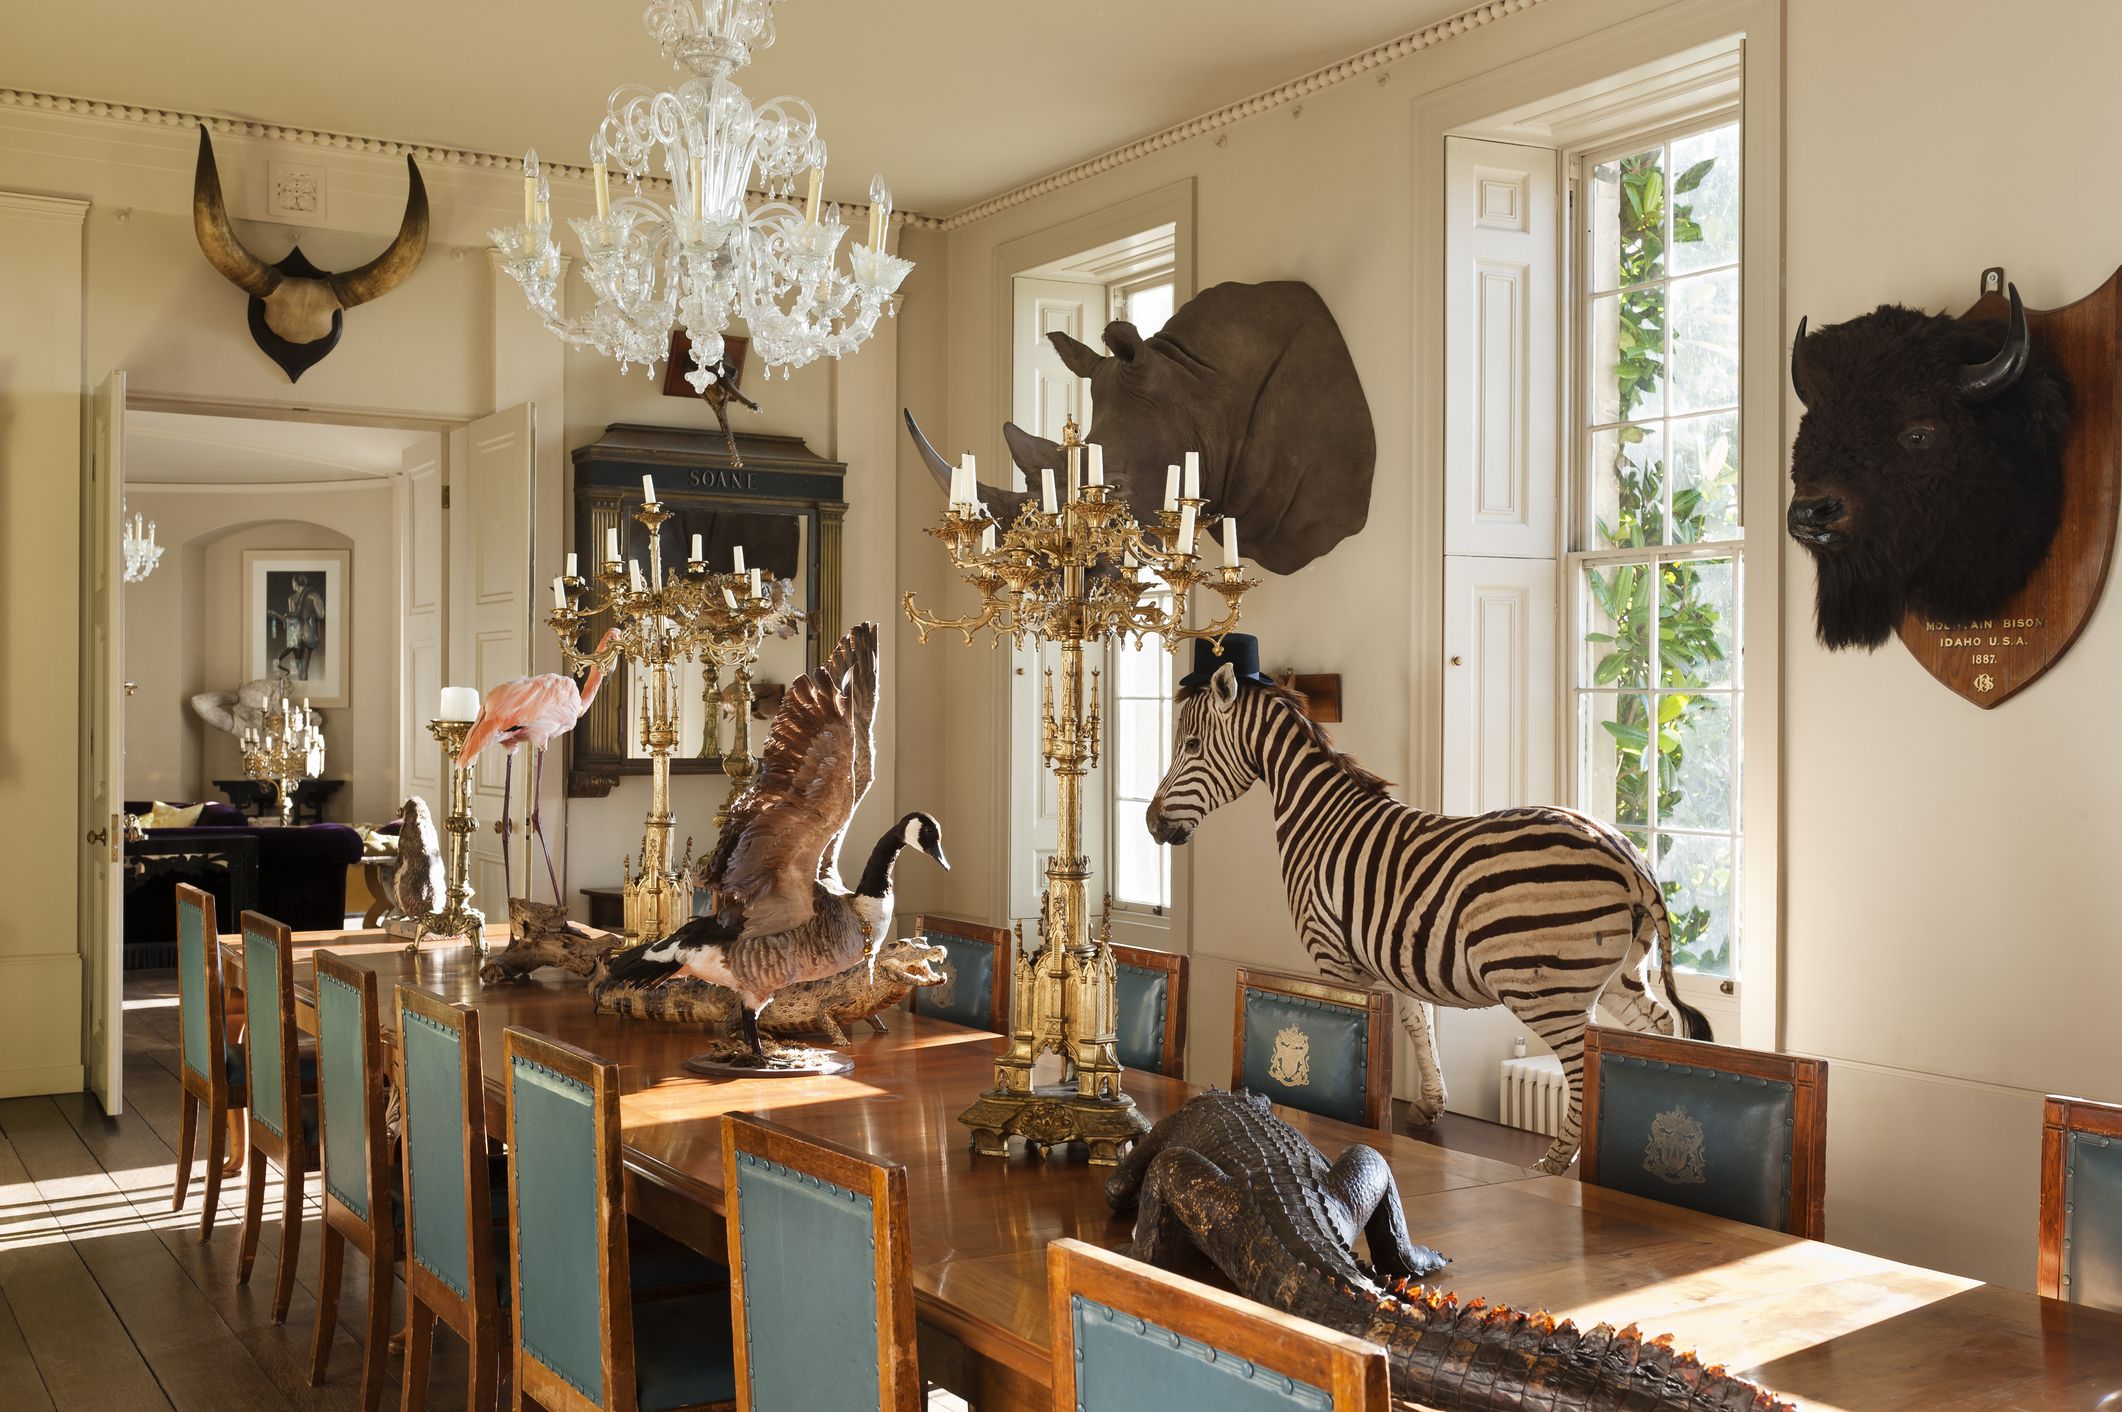 housebeautiful.com - Jessica Cherner - Does Taxidermy Deserve a Place in Your Home? Designers Weigh In